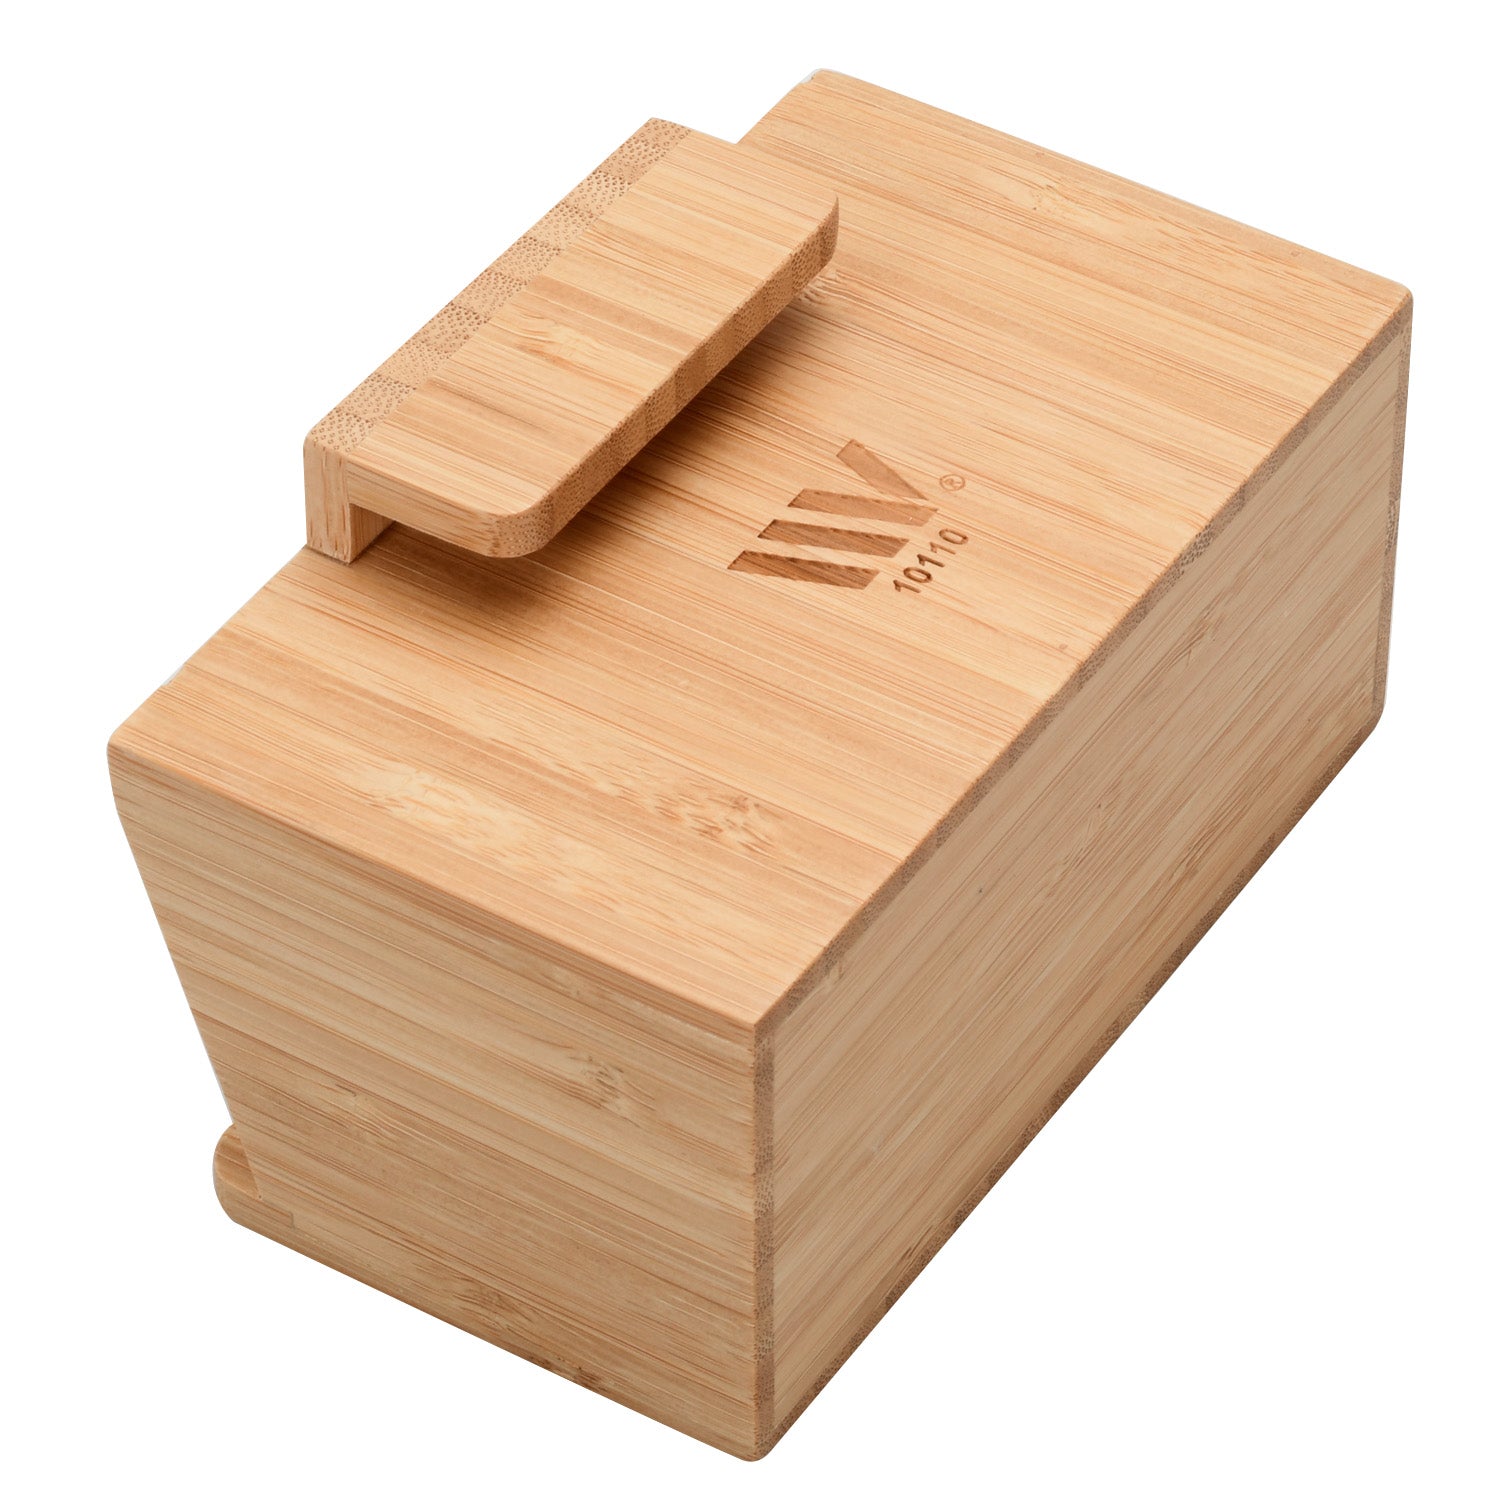 Bamboo Caddy Add-On for Charging Stations and Office Organizers